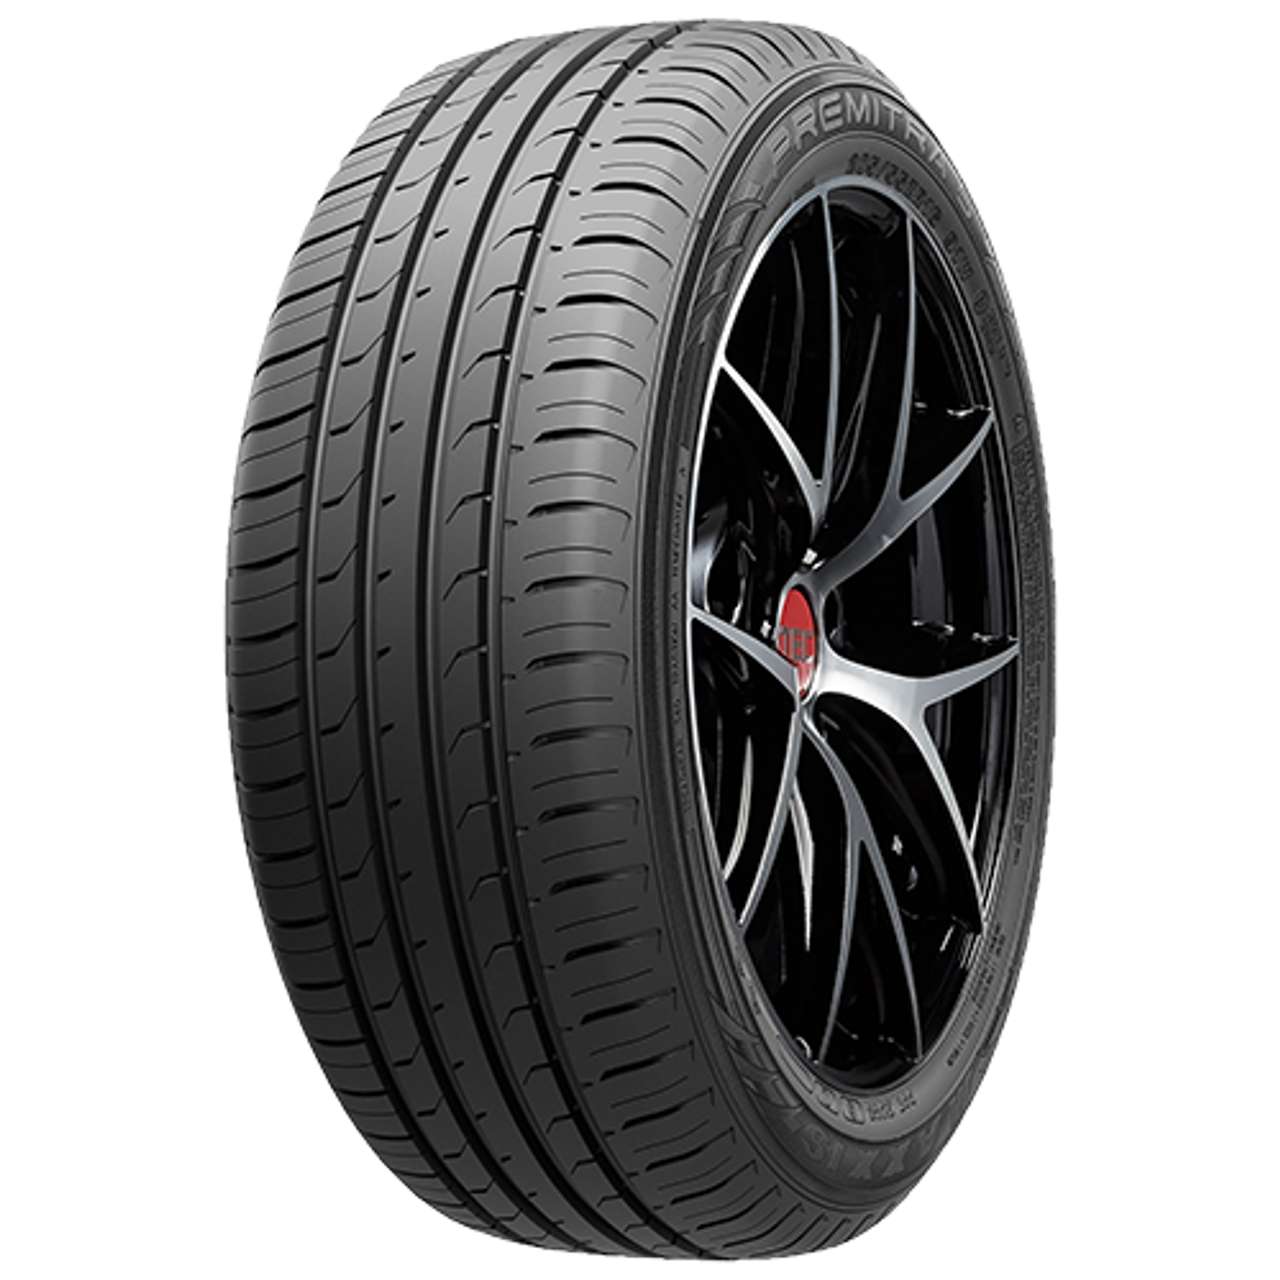 MAXXIS PREMITRA HP5 185/55R16 83V BSW